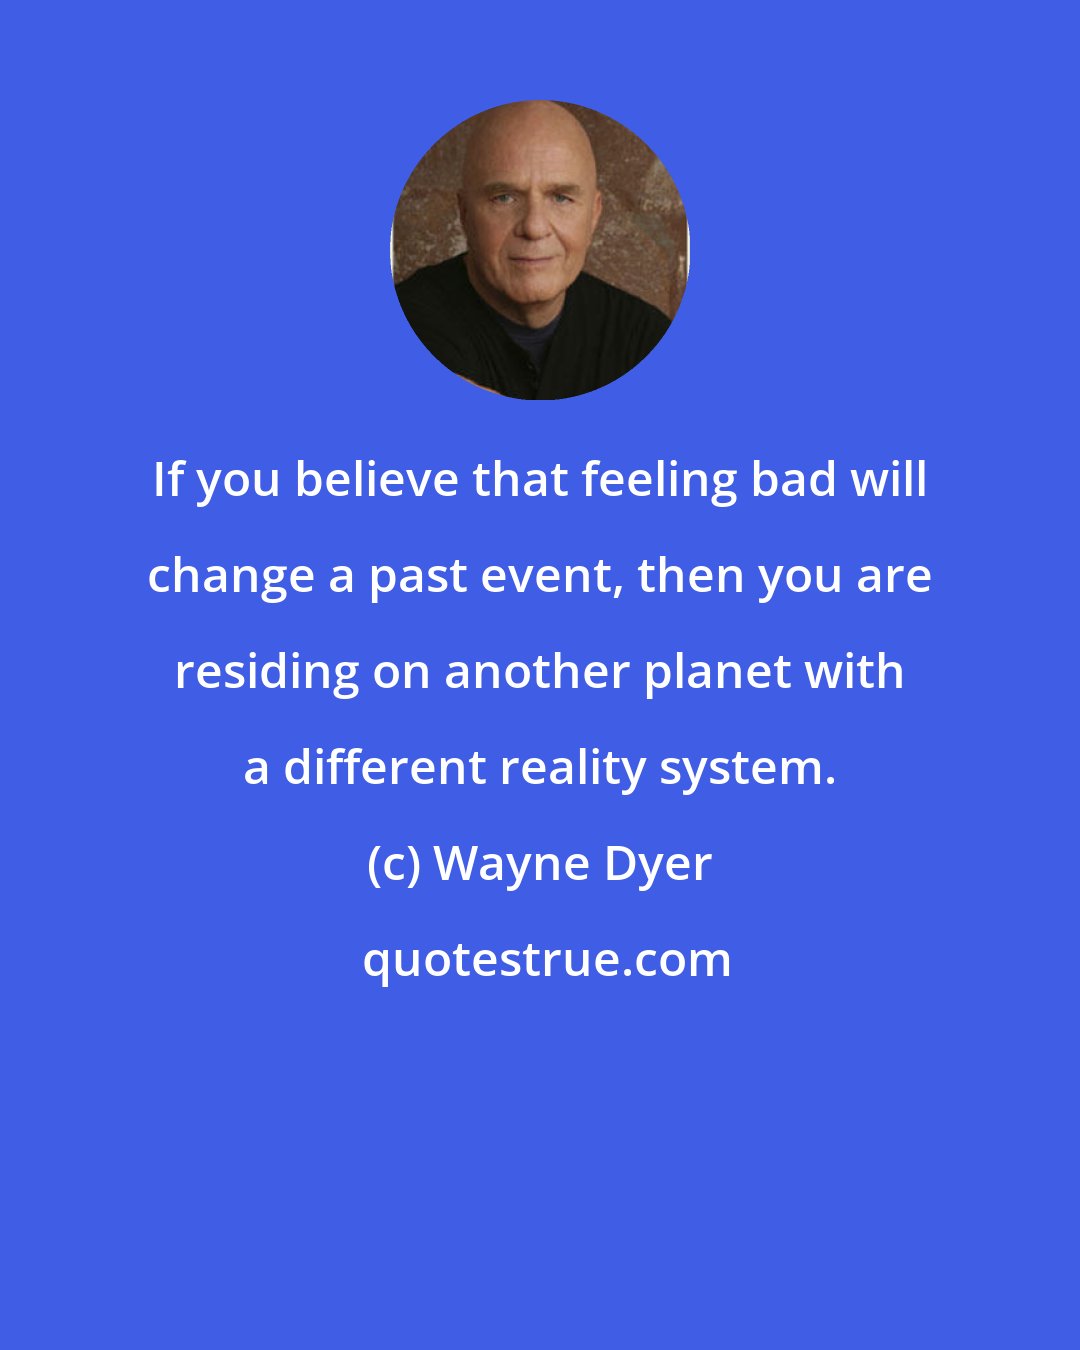 Wayne Dyer: If you believe that feeling bad will change a past event, then you are residing on another planet with a different reality system.